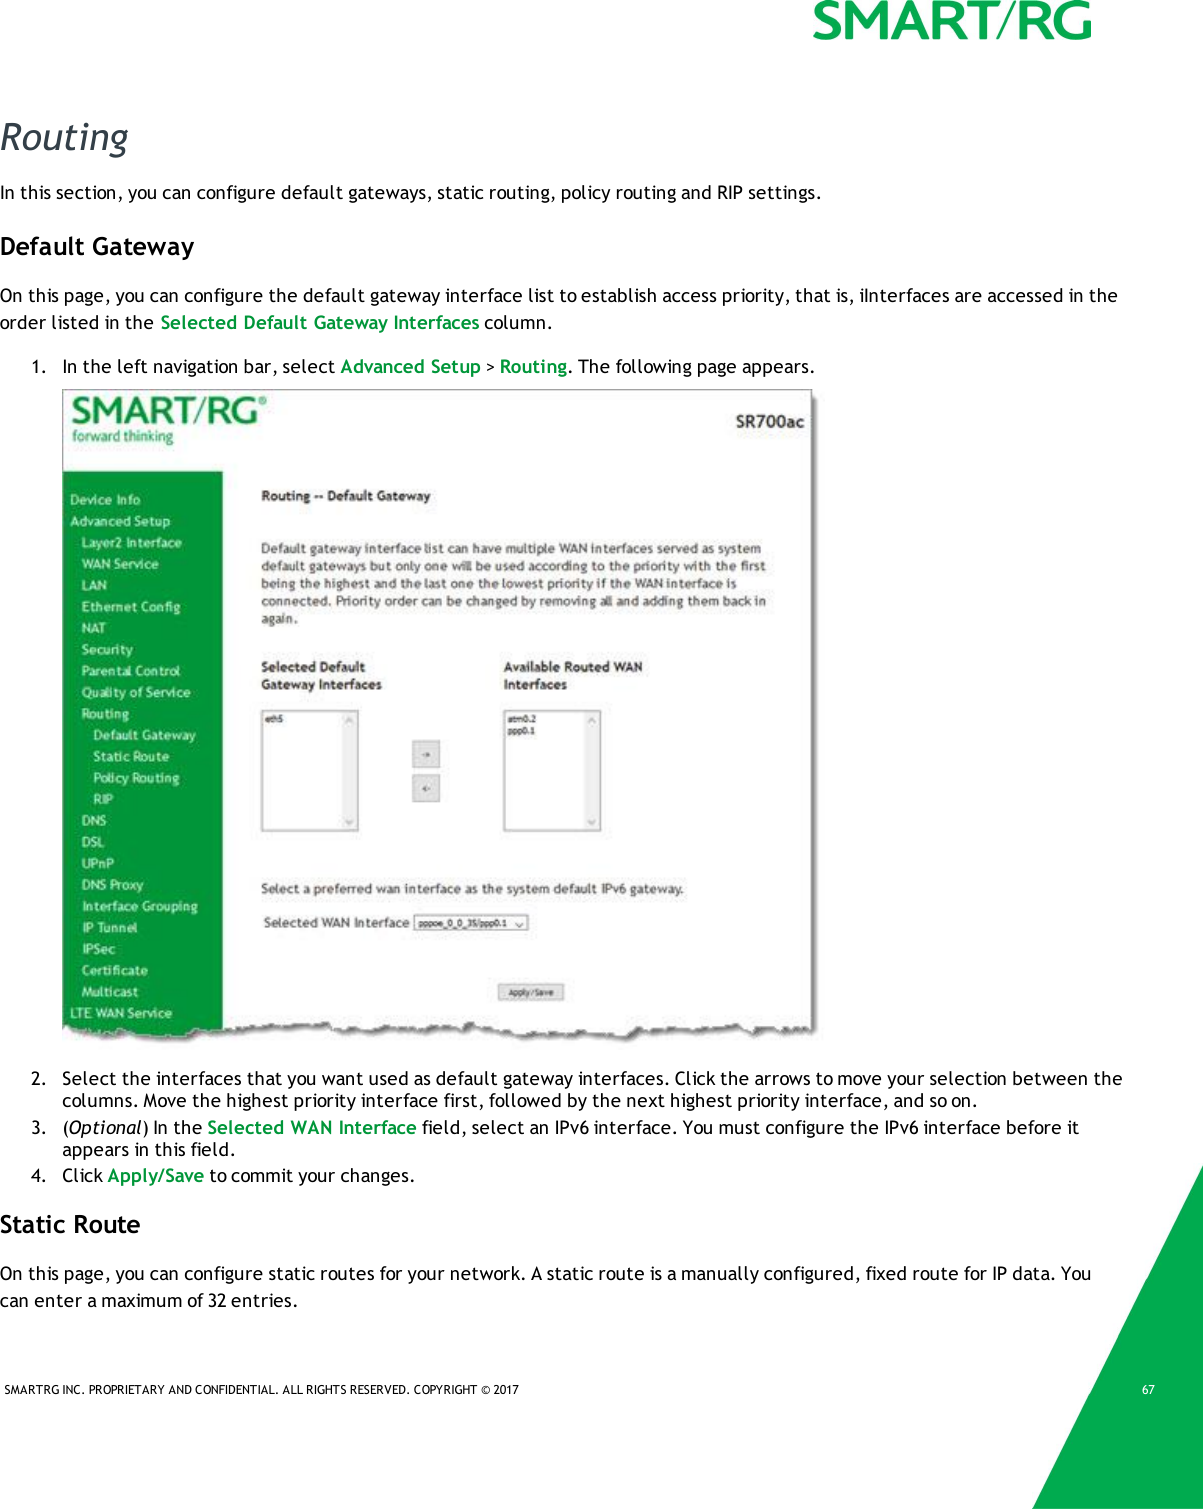 SMARTRG INC. PROPRIETARY AND CONFIDENTIAL. ALL RIGHTS RESERVED. COPYRIGHT © 2017 67RoutingIn this section, you can configure default gateways, static routing, policy routing and RIP settings.Default GatewayOn this page, you can configure the default gateway interface list to establish access priority, that is, iInterfaces are accessed in theorder listed in the Selected Default Gateway Interfaces column.1. In the left navigation bar, select Advanced Setup &gt;Routing. The following page appears.2. Select the interfaces that you want used as default gateway interfaces. Click the arrows to move your selection between thecolumns. Move the highest priority interface first, followed by the next highest priority interface, and so on.3. (Optional) In the Selected WAN Interface field, select an IPv6 interface. You must configure the IPv6 interface before itappears in this field.4. Click Apply/Save to commit your changes.Static RouteOn this page, you can configure static routes for your network. A static route is a manually configured, fixed route for IP data. Youcan enter a maximum of 32 entries.